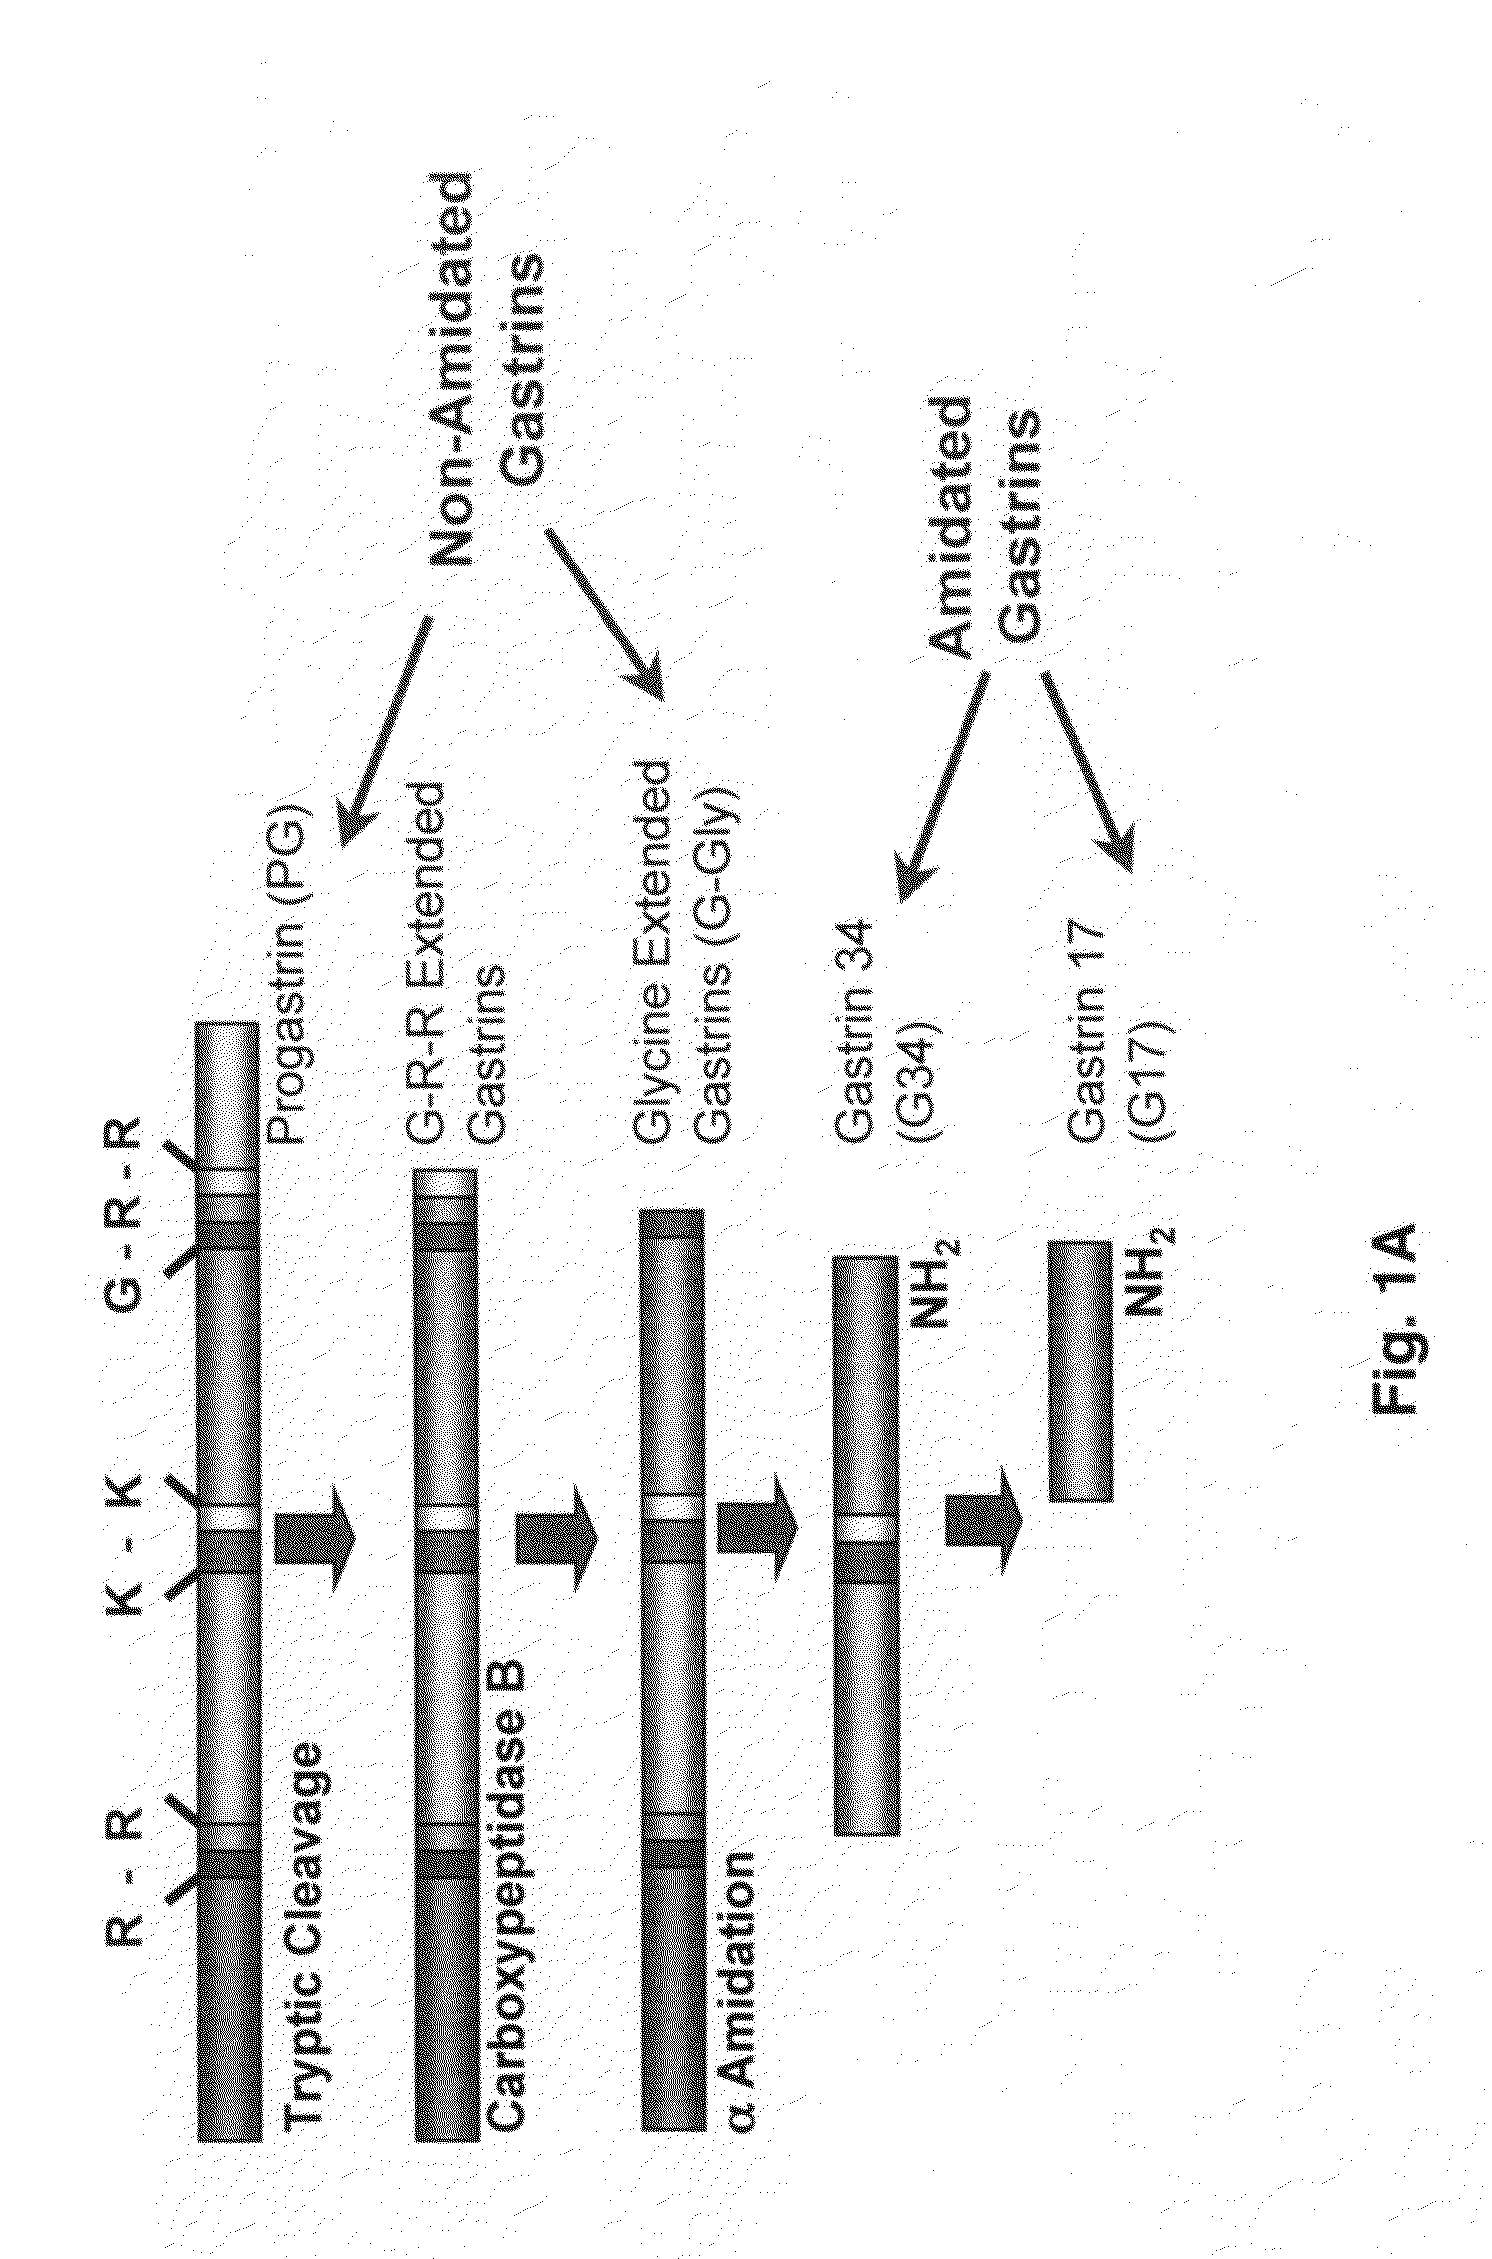 Immunogenic compositions comprising progastrin and uses thereof